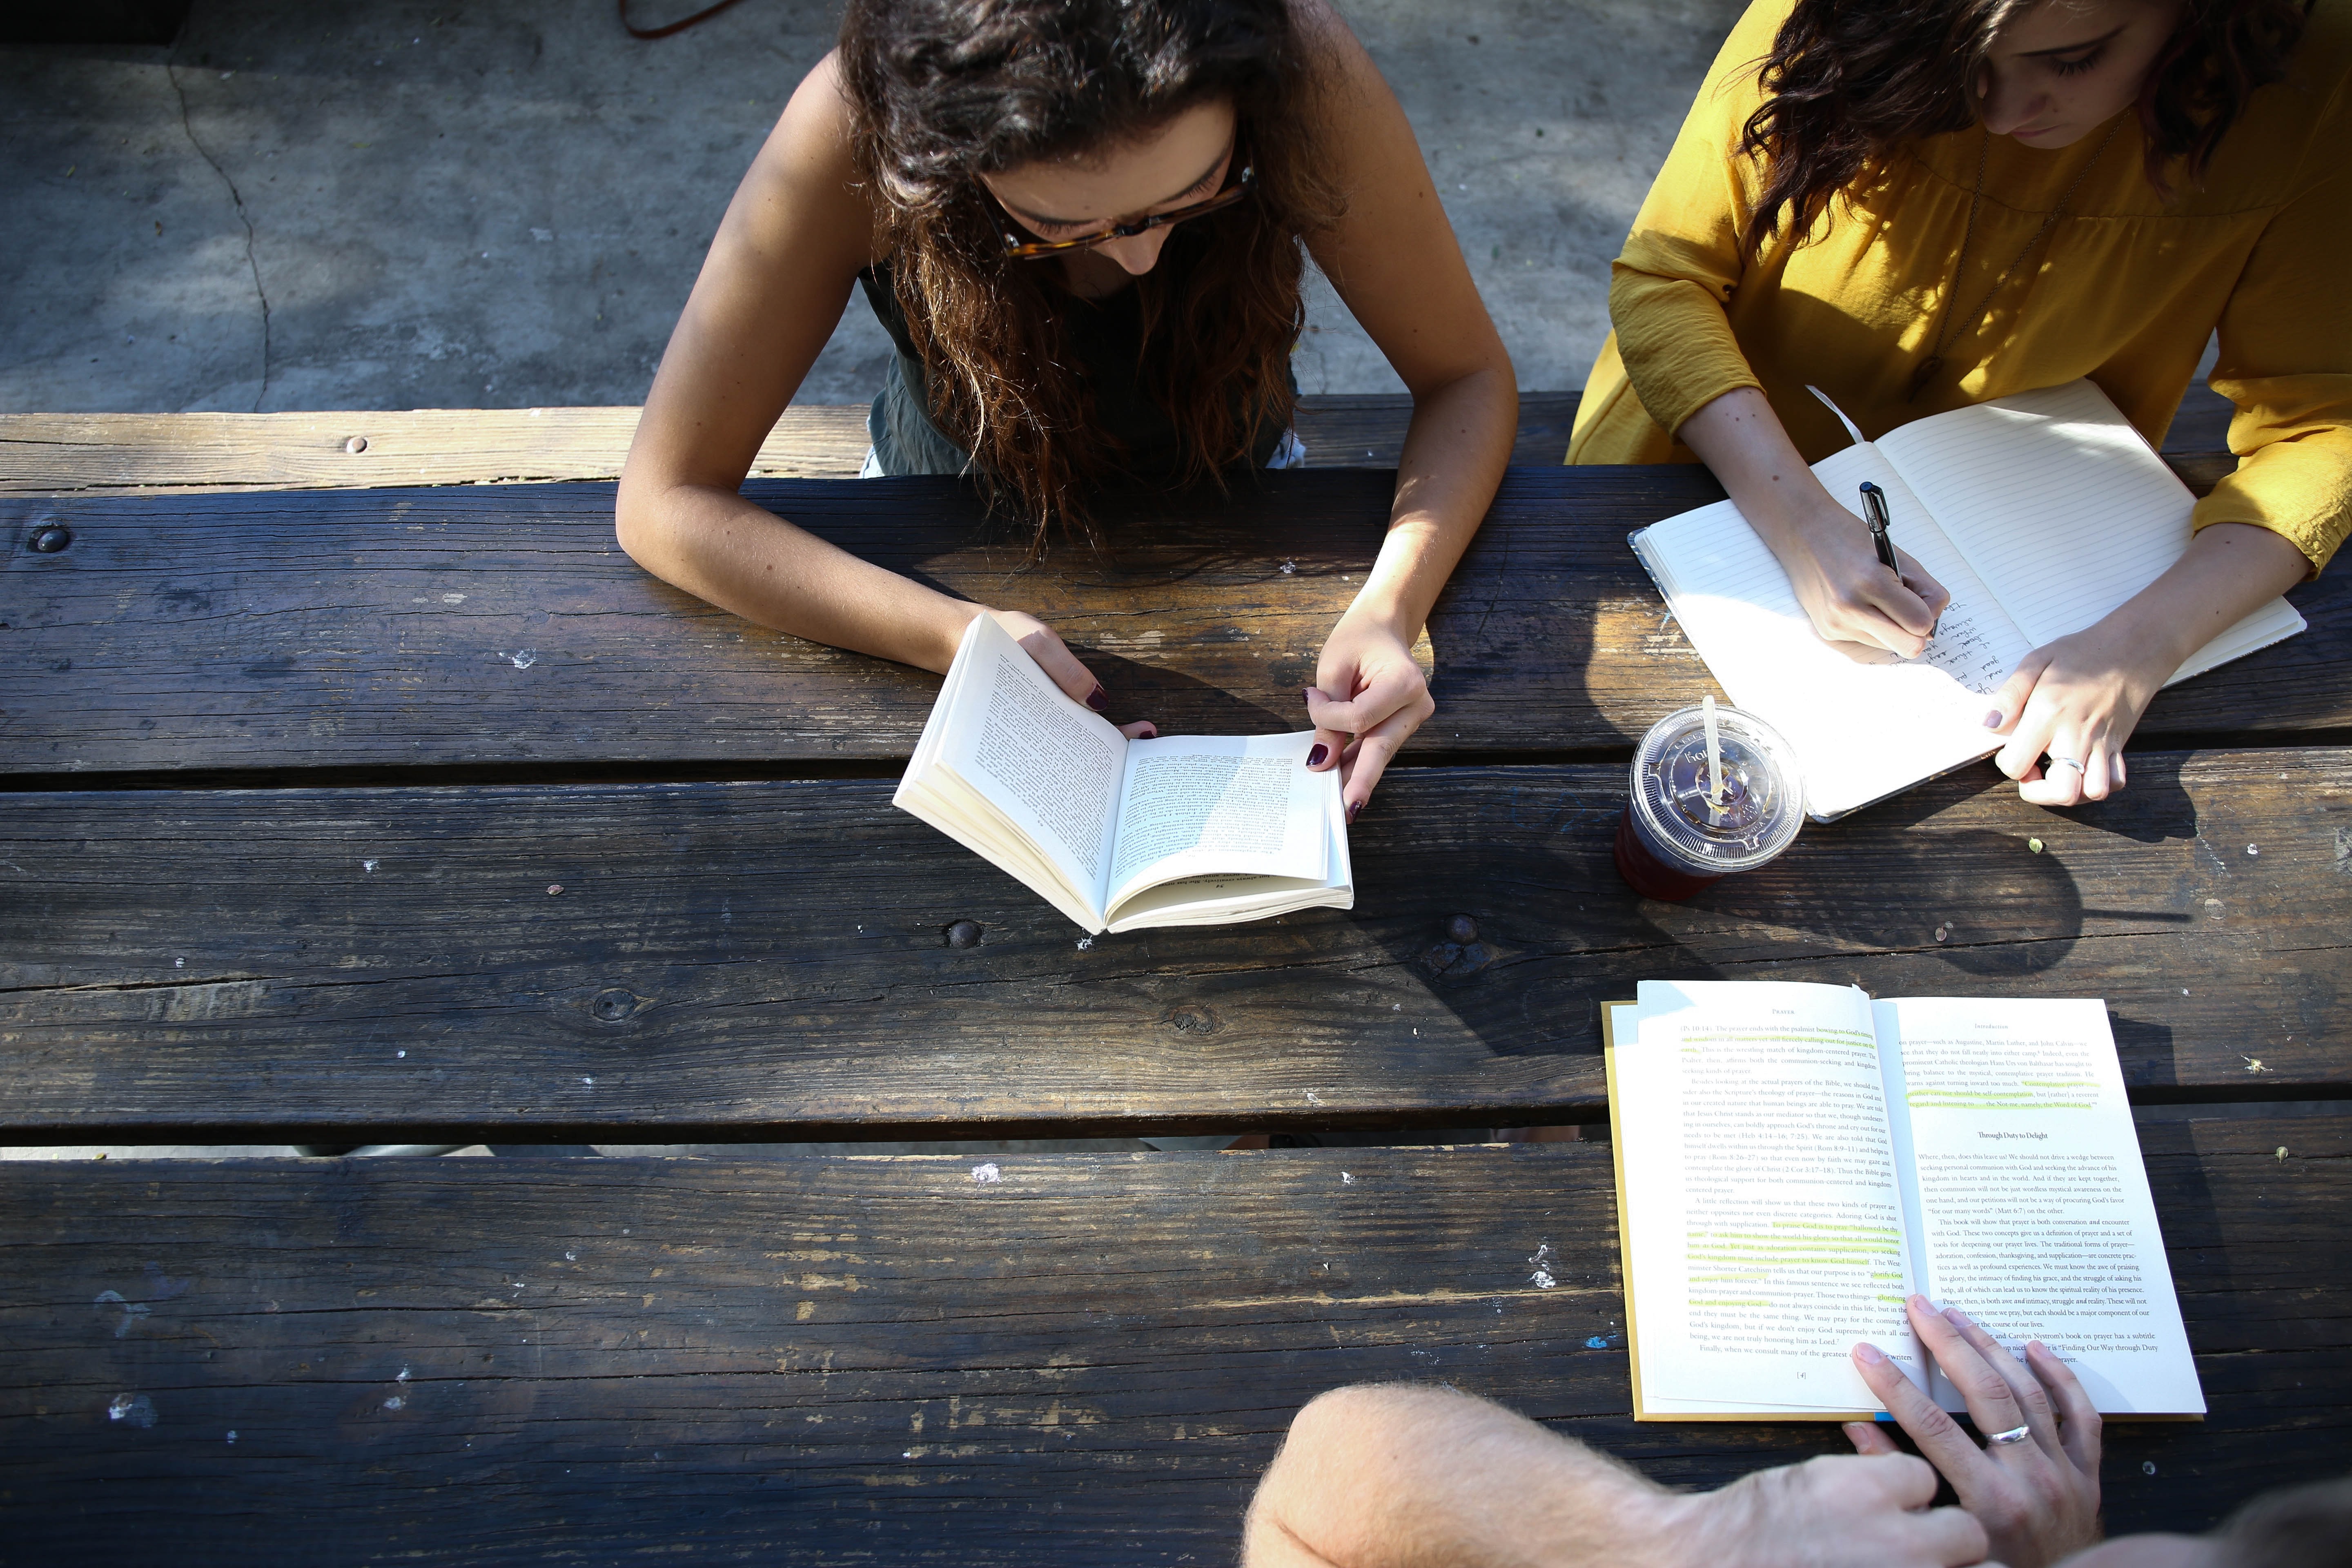 Three young women study at a picnic table. Each holds a book, and two are reading. A third takes notes on the pages in front of her. A drink in a clear plastic cup sits to her right.